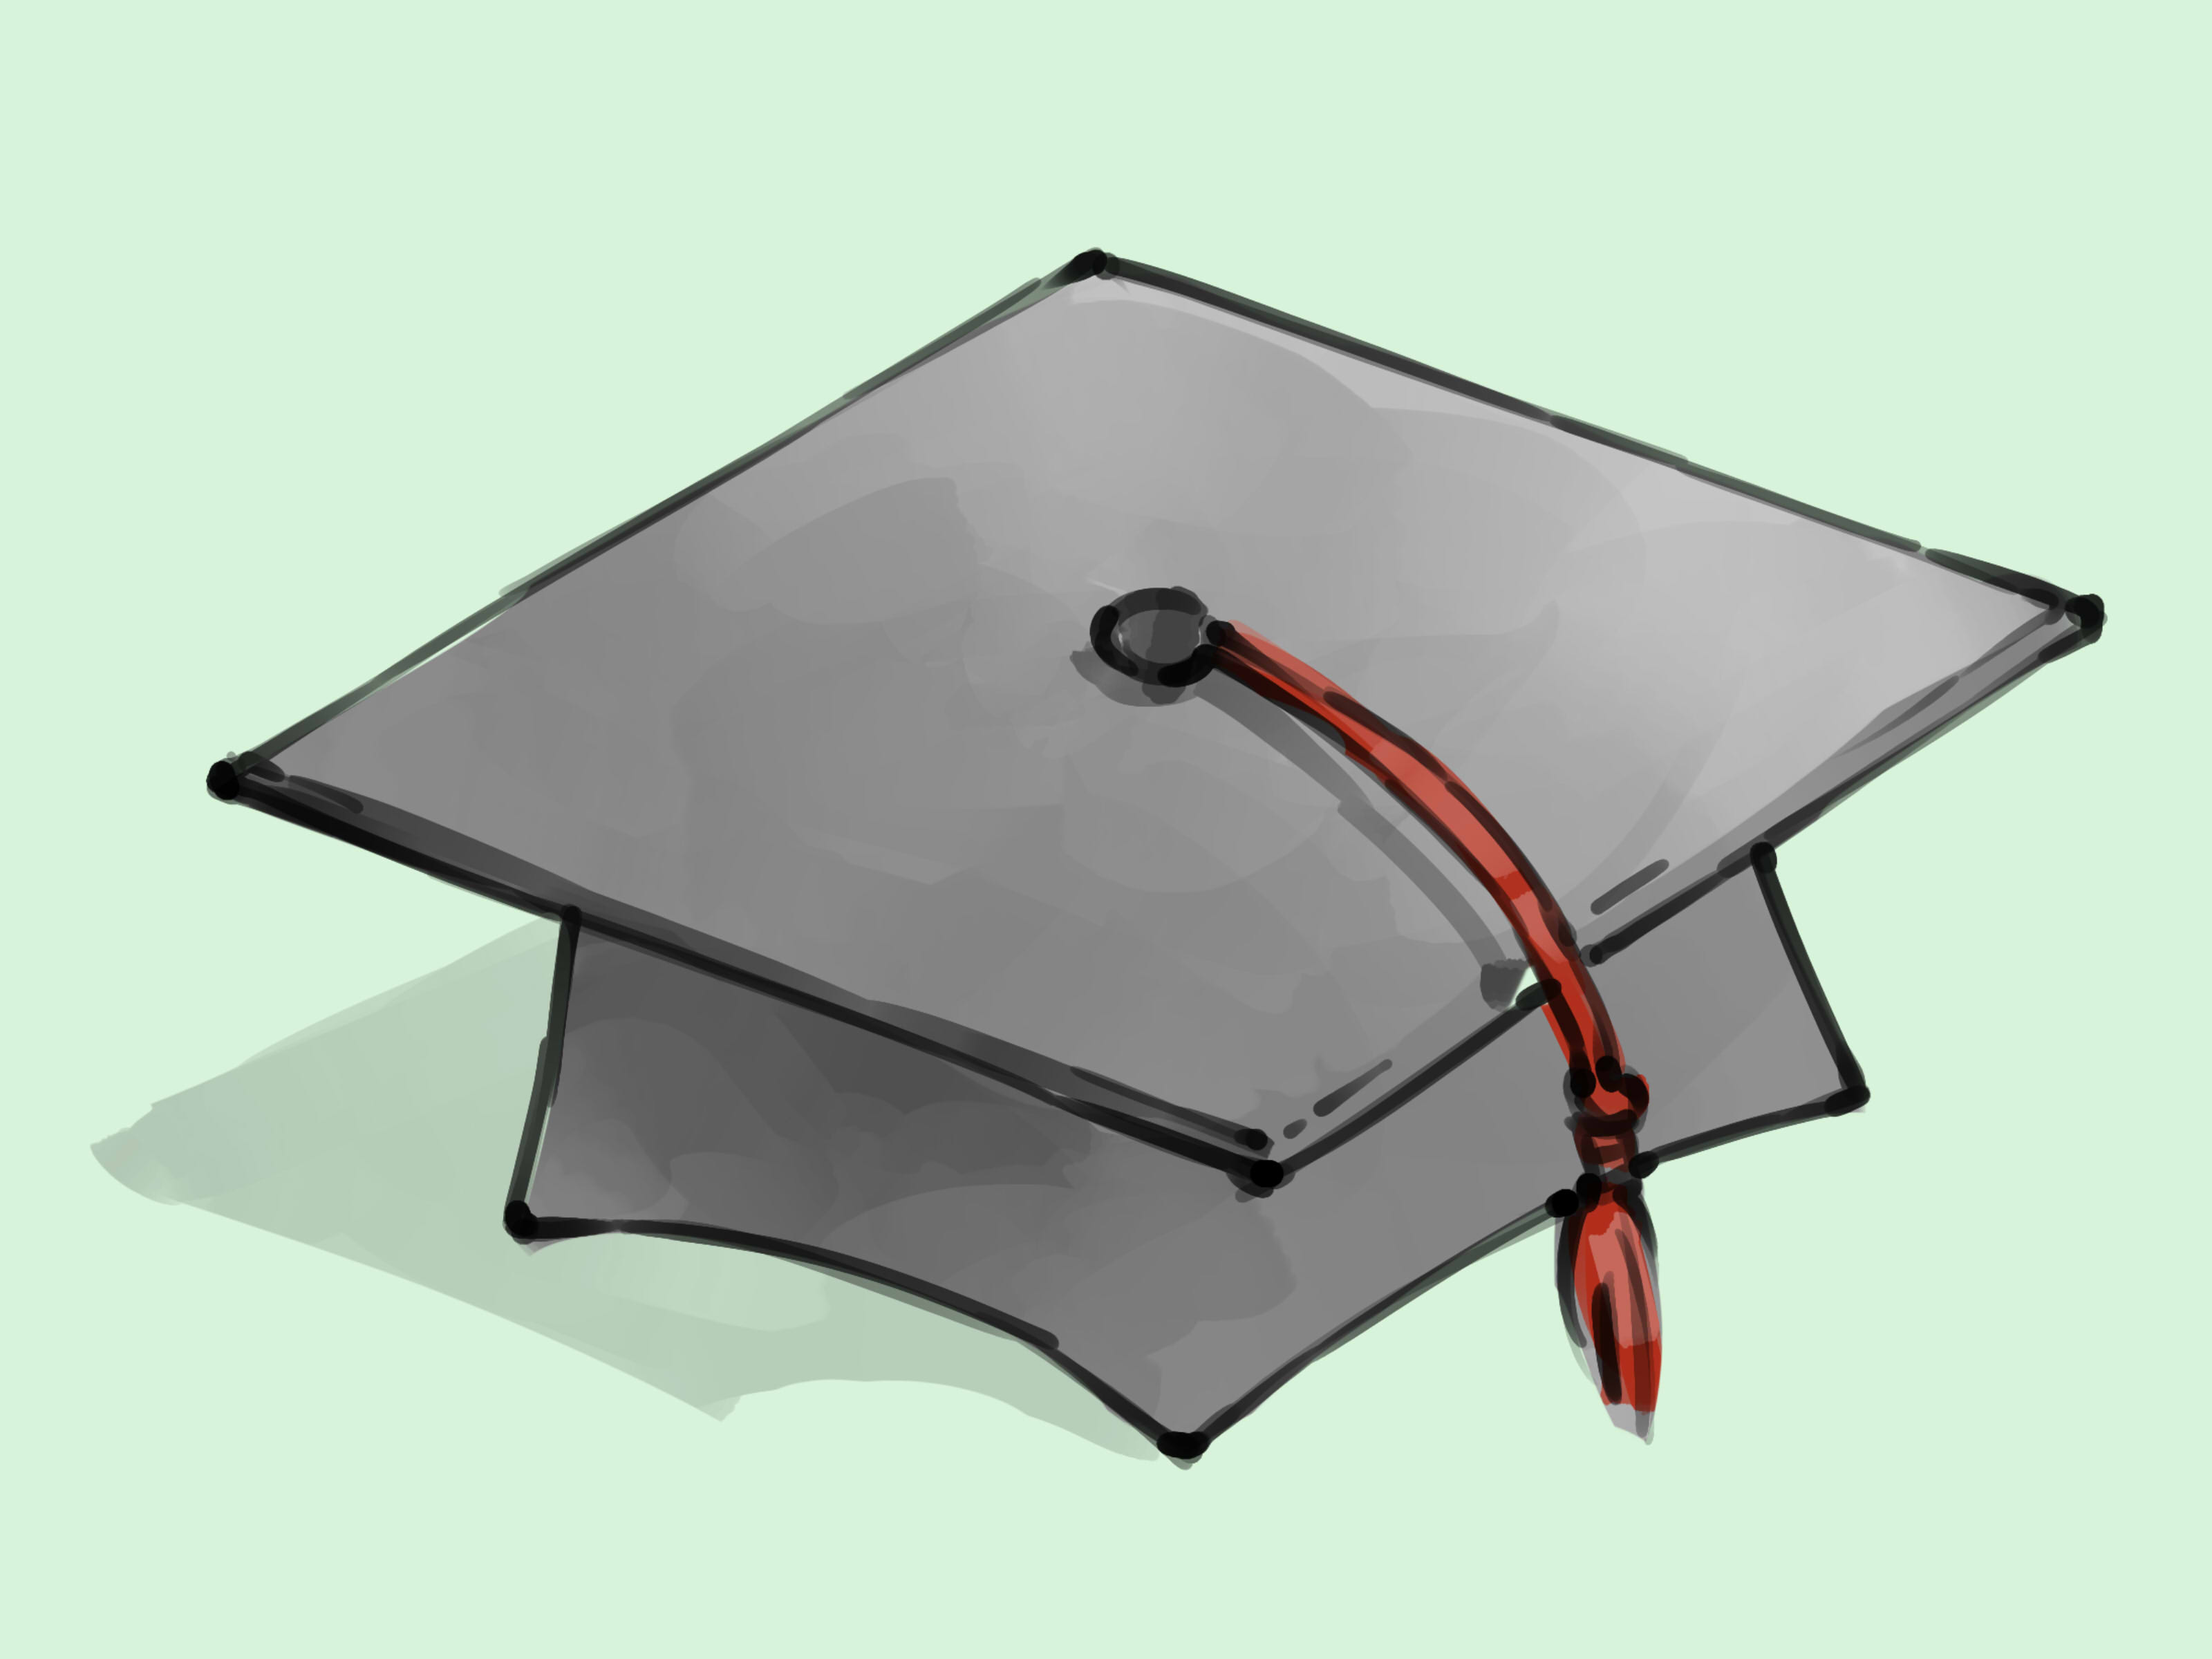 graduation drawings How to draw a graduation cap 5 st with pictures wikihow jpg 2